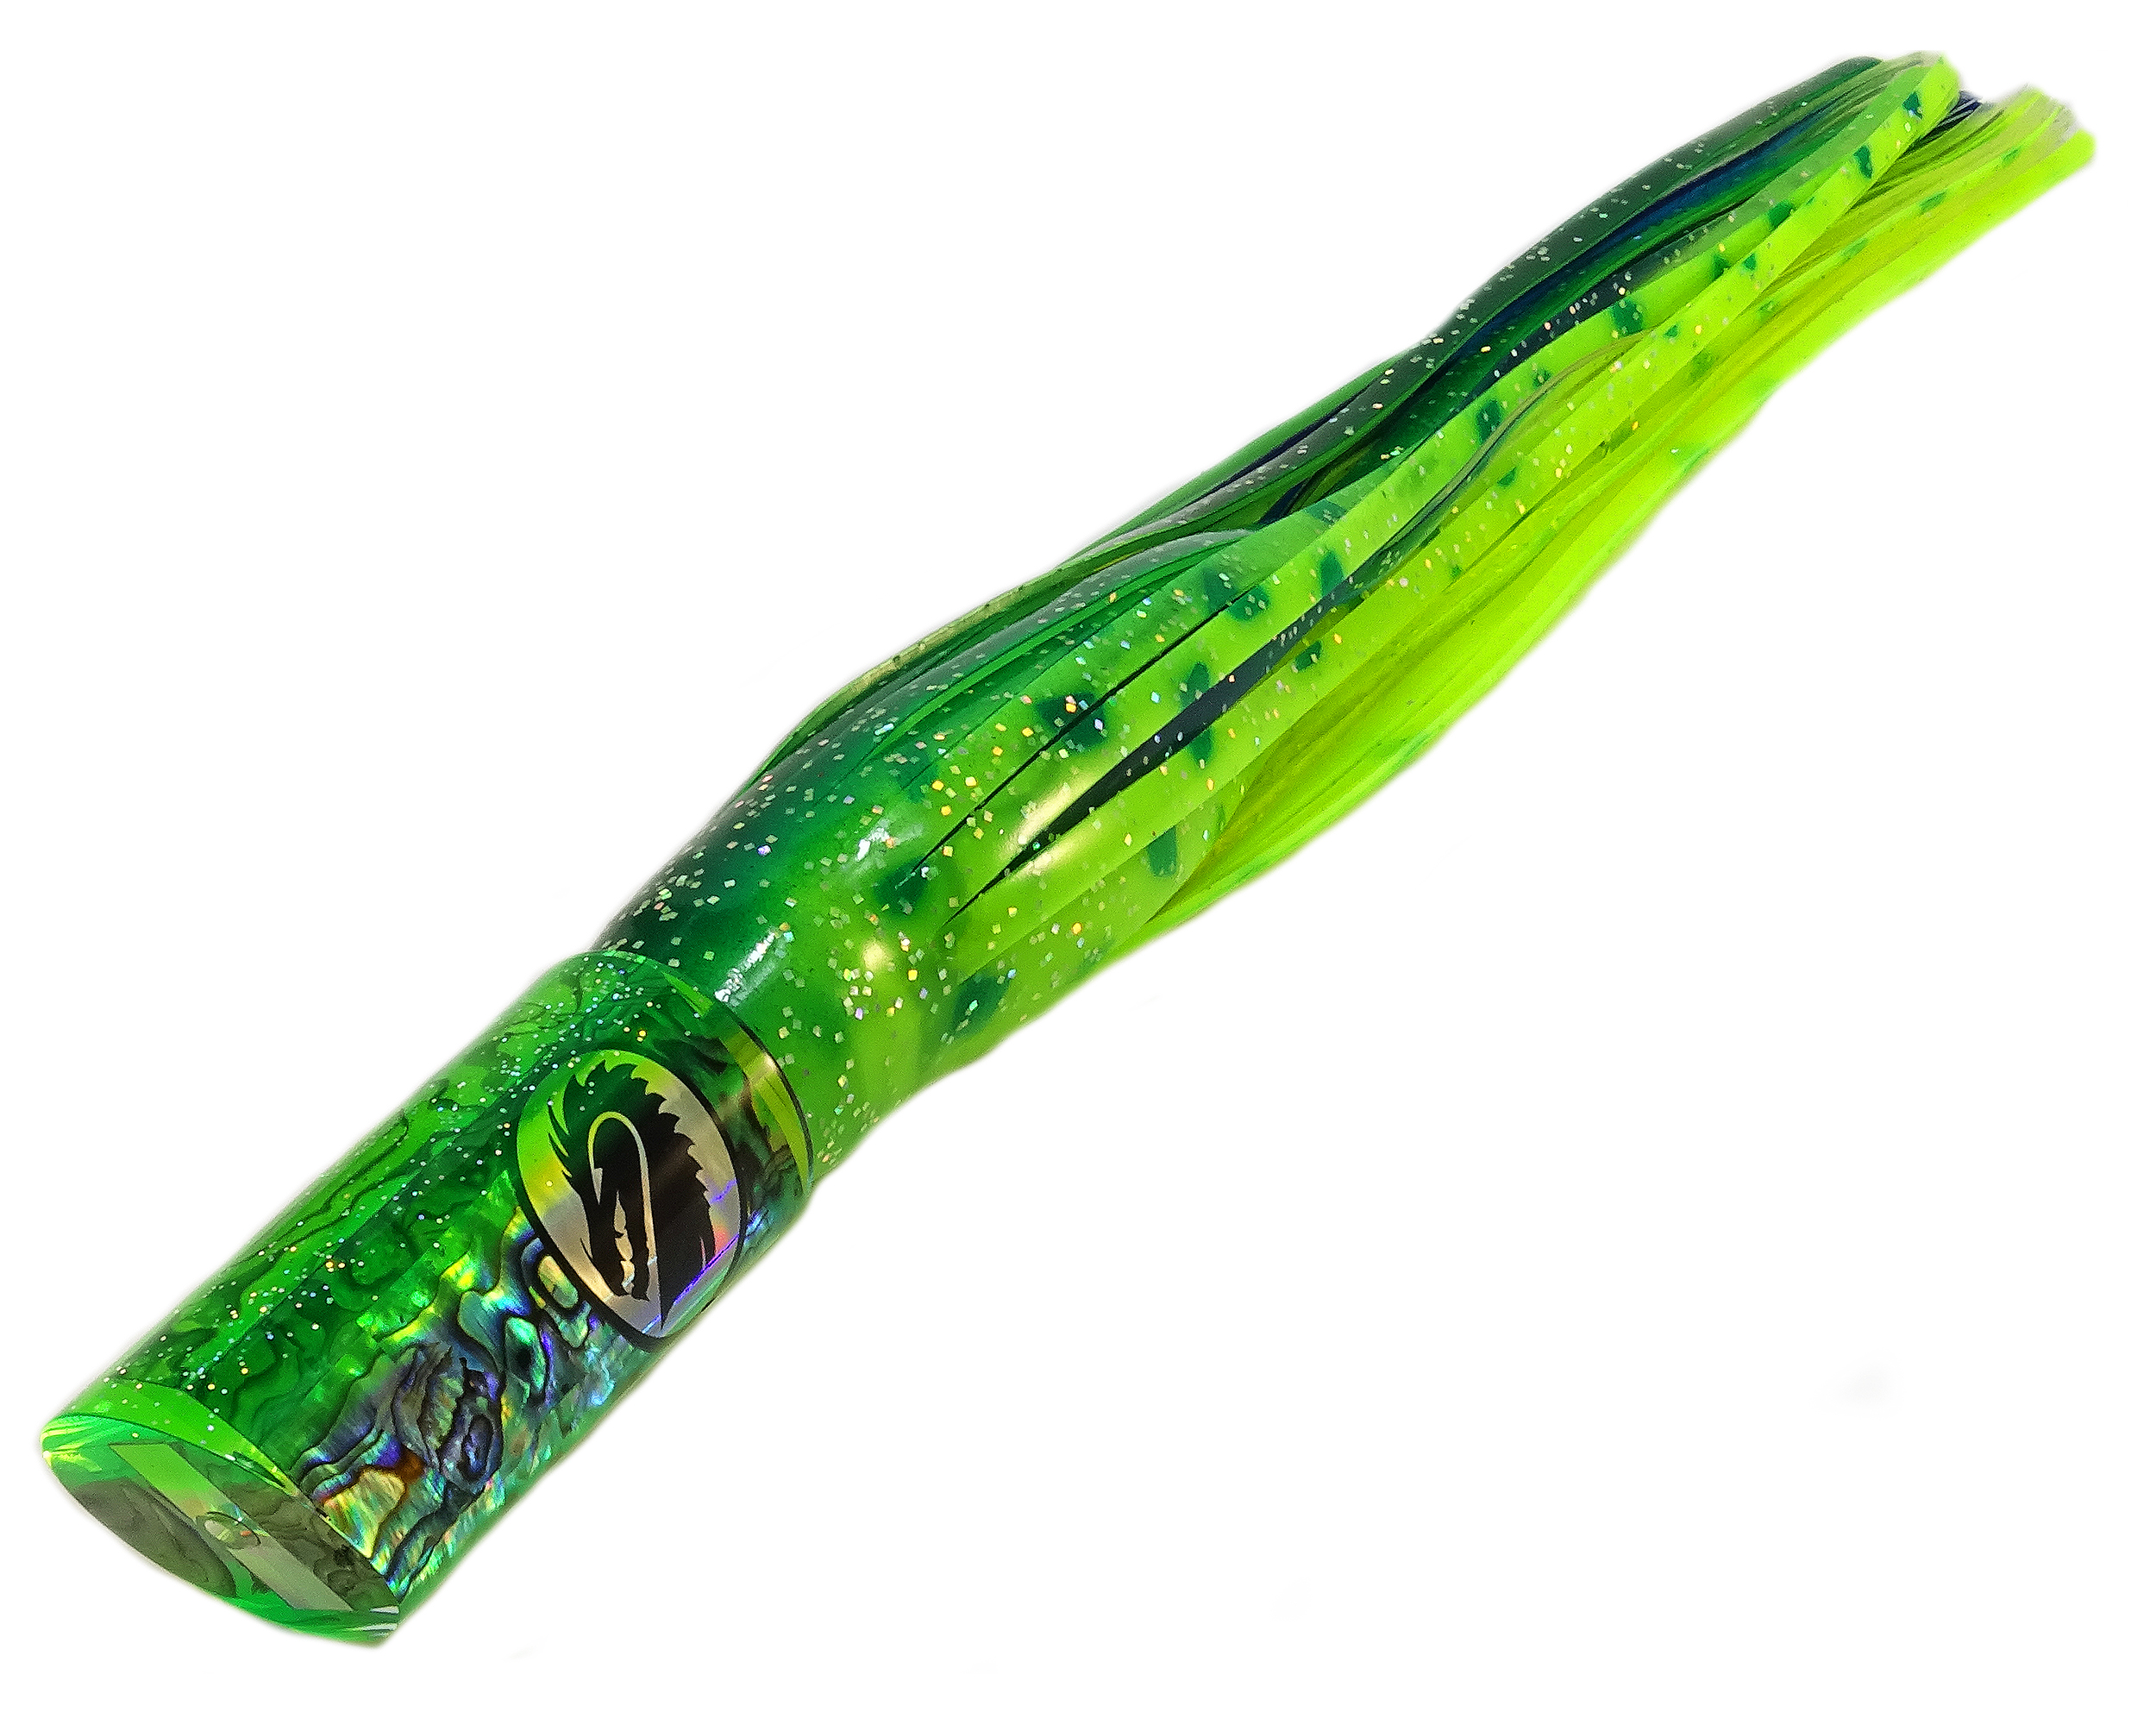 Dear Henry - Heavily keel weighted tube trolling lure